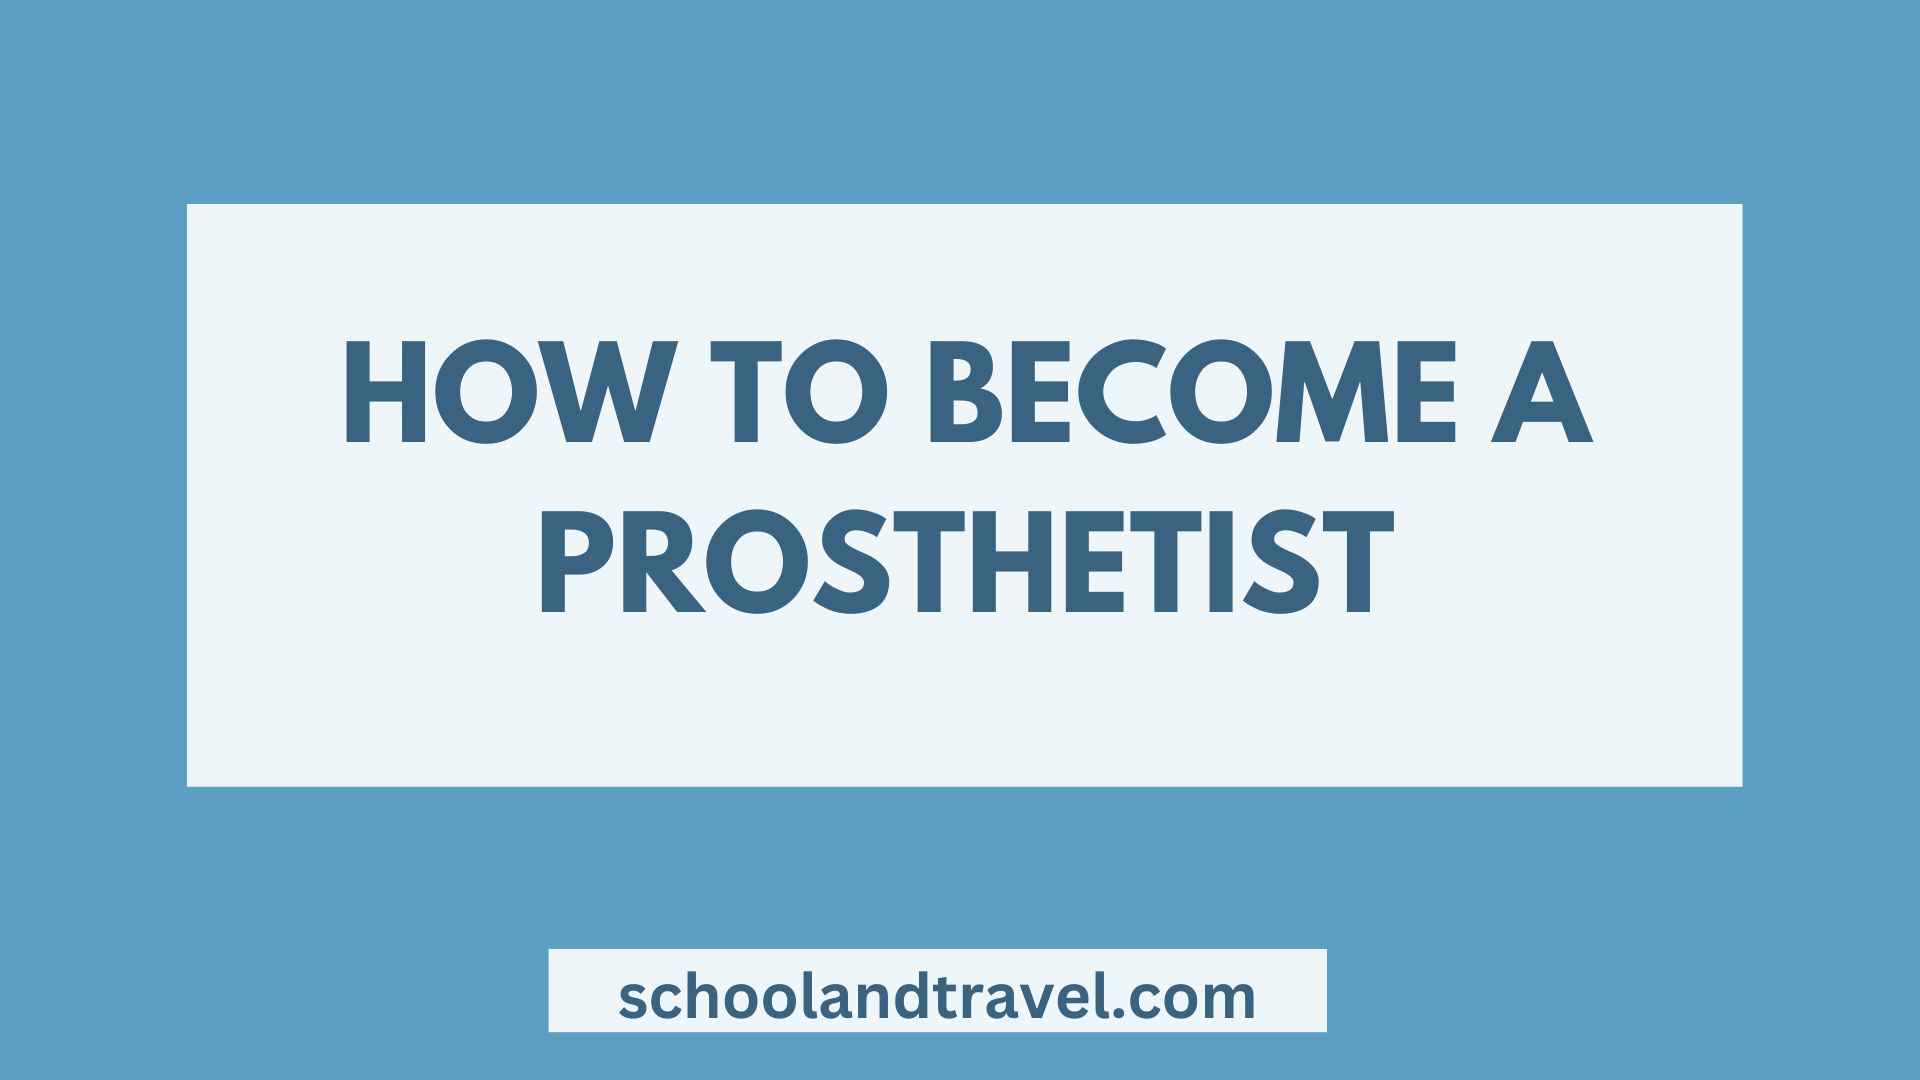 How To Become A Prosthetist